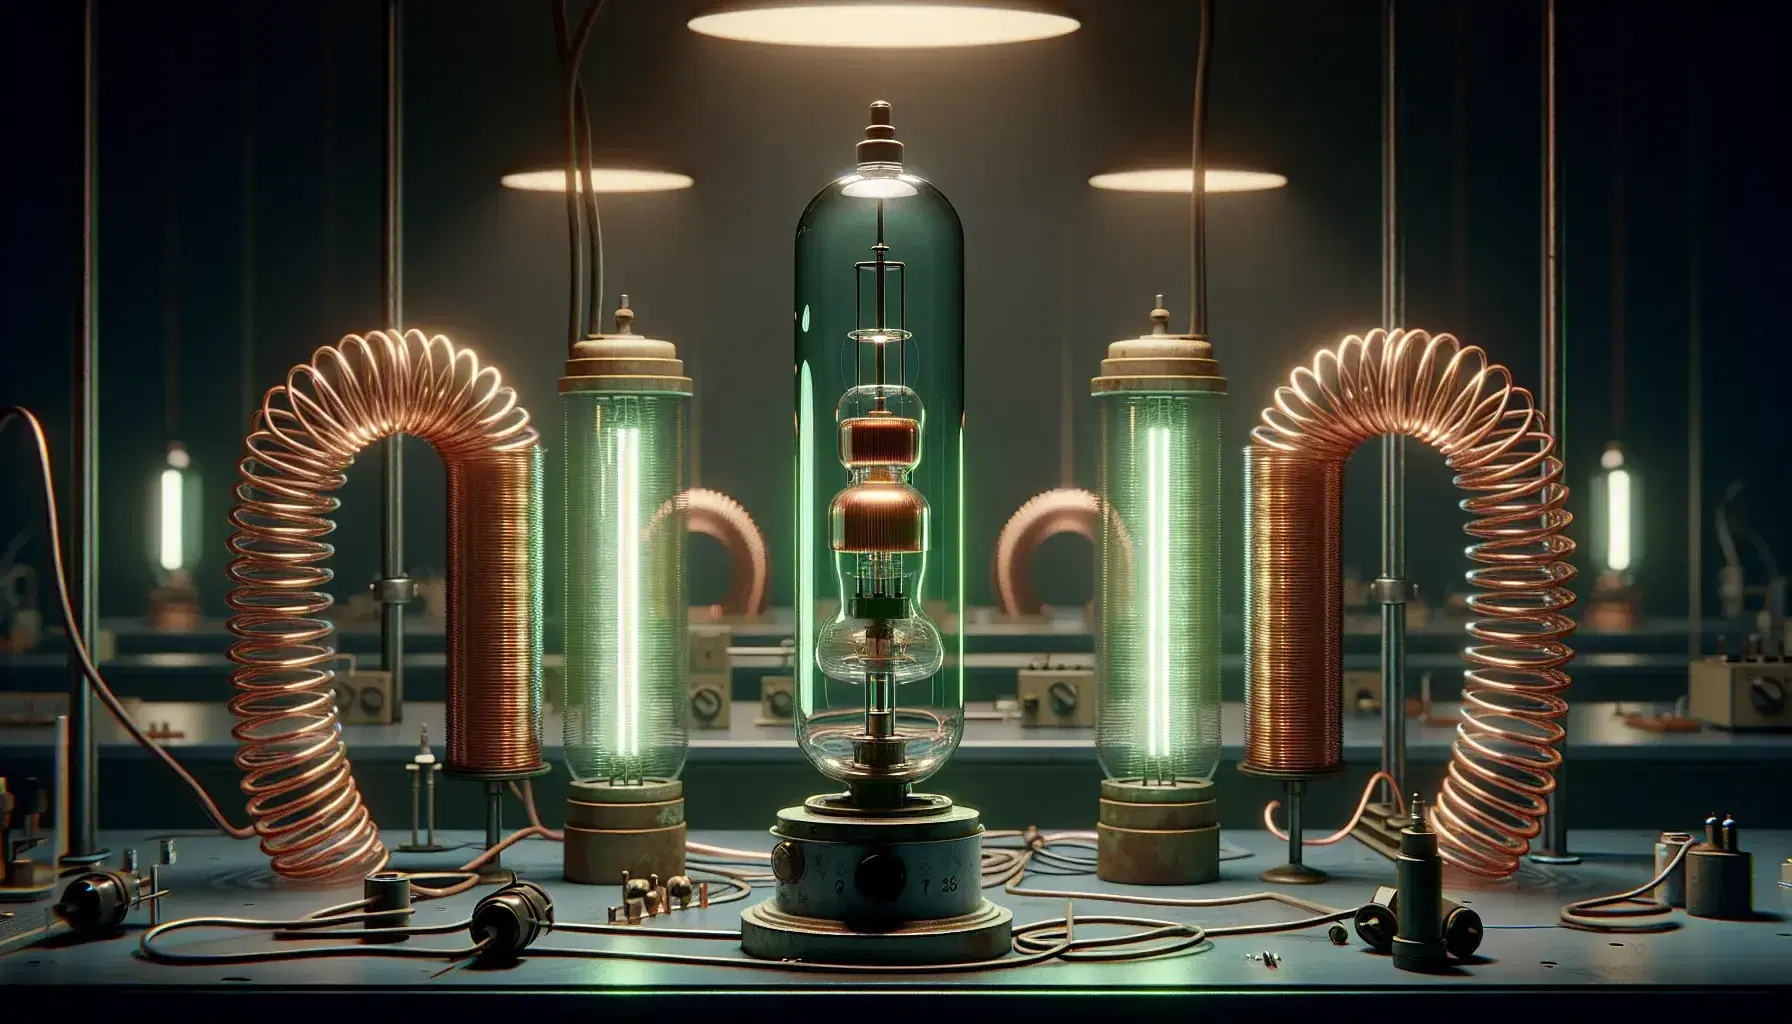 Laboratory with active cathode ray tube, copper Helmholtz coils and table with spherical atomic models of various elements.